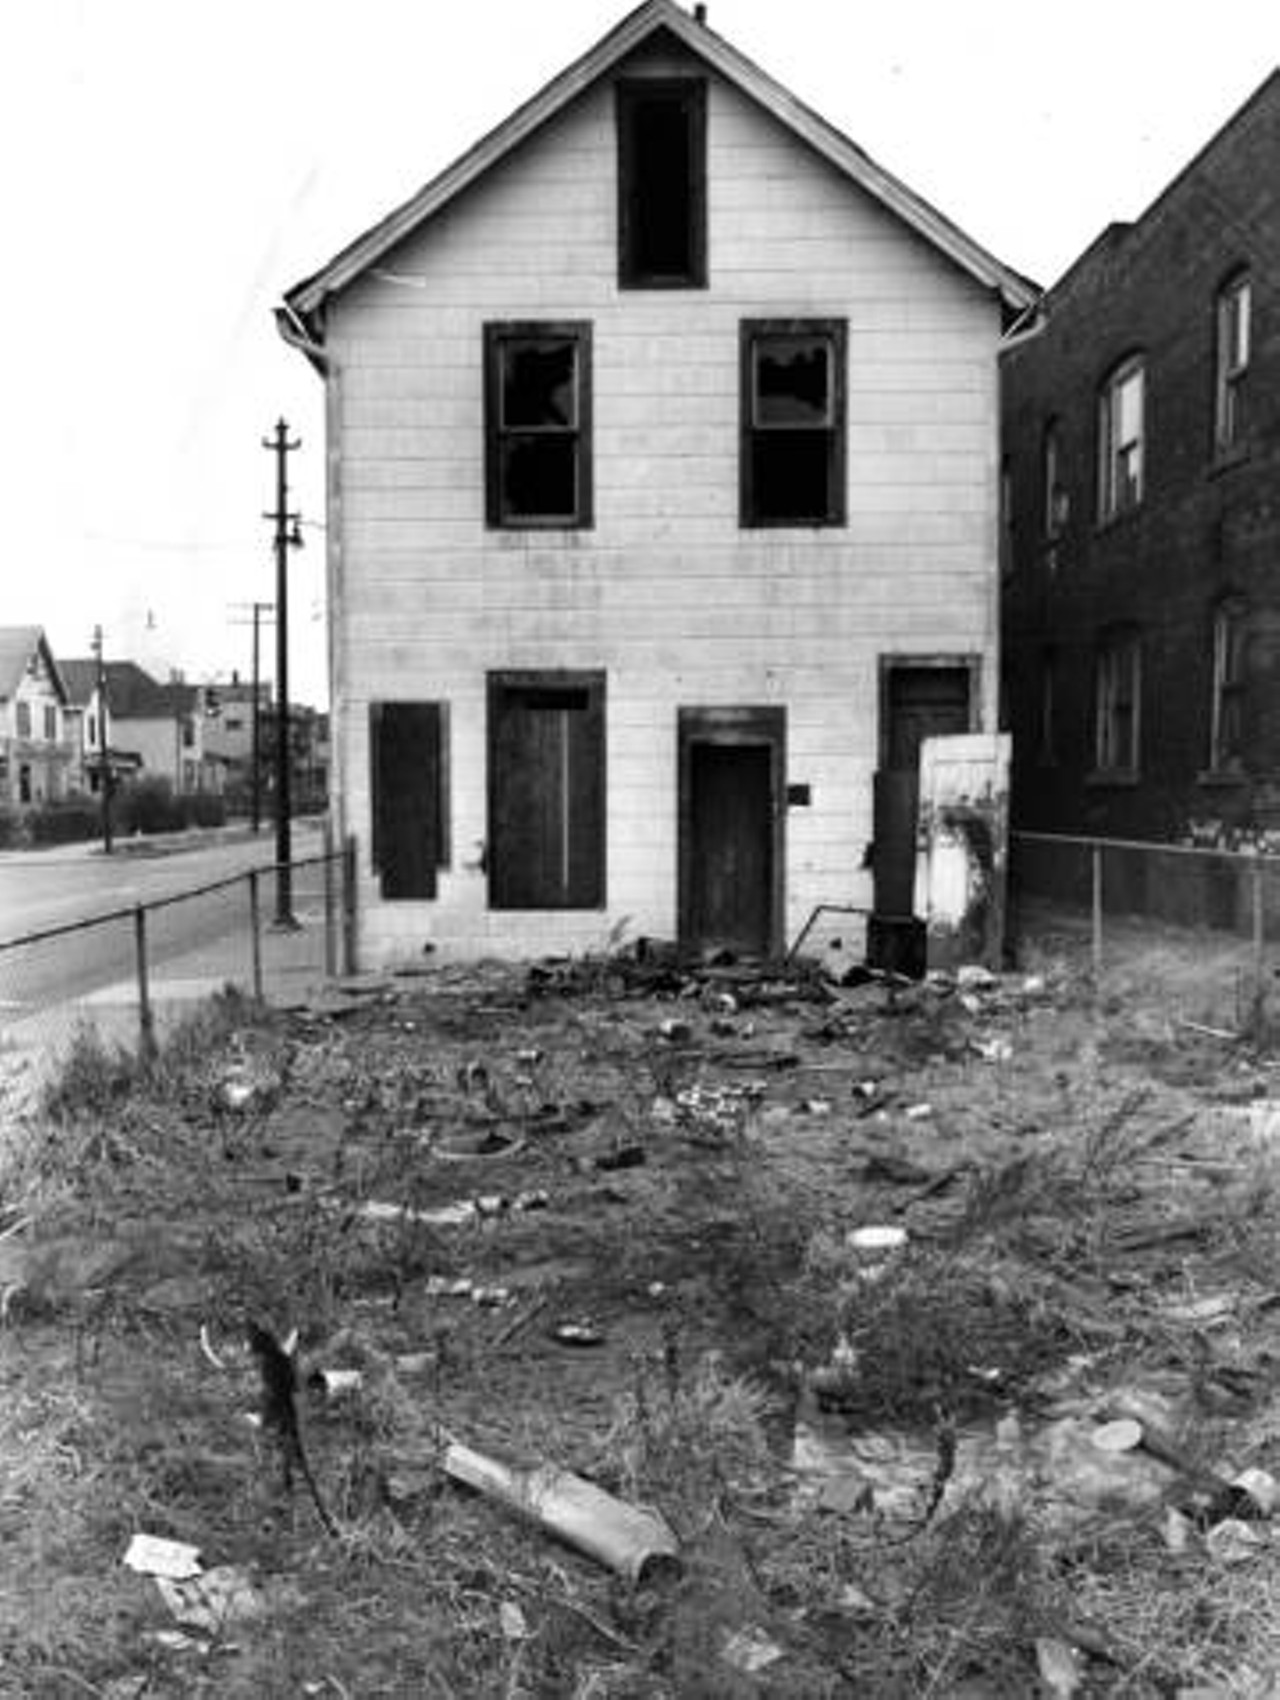 1567 East 65th Street, partially destroyed during Hough Riots, 1967